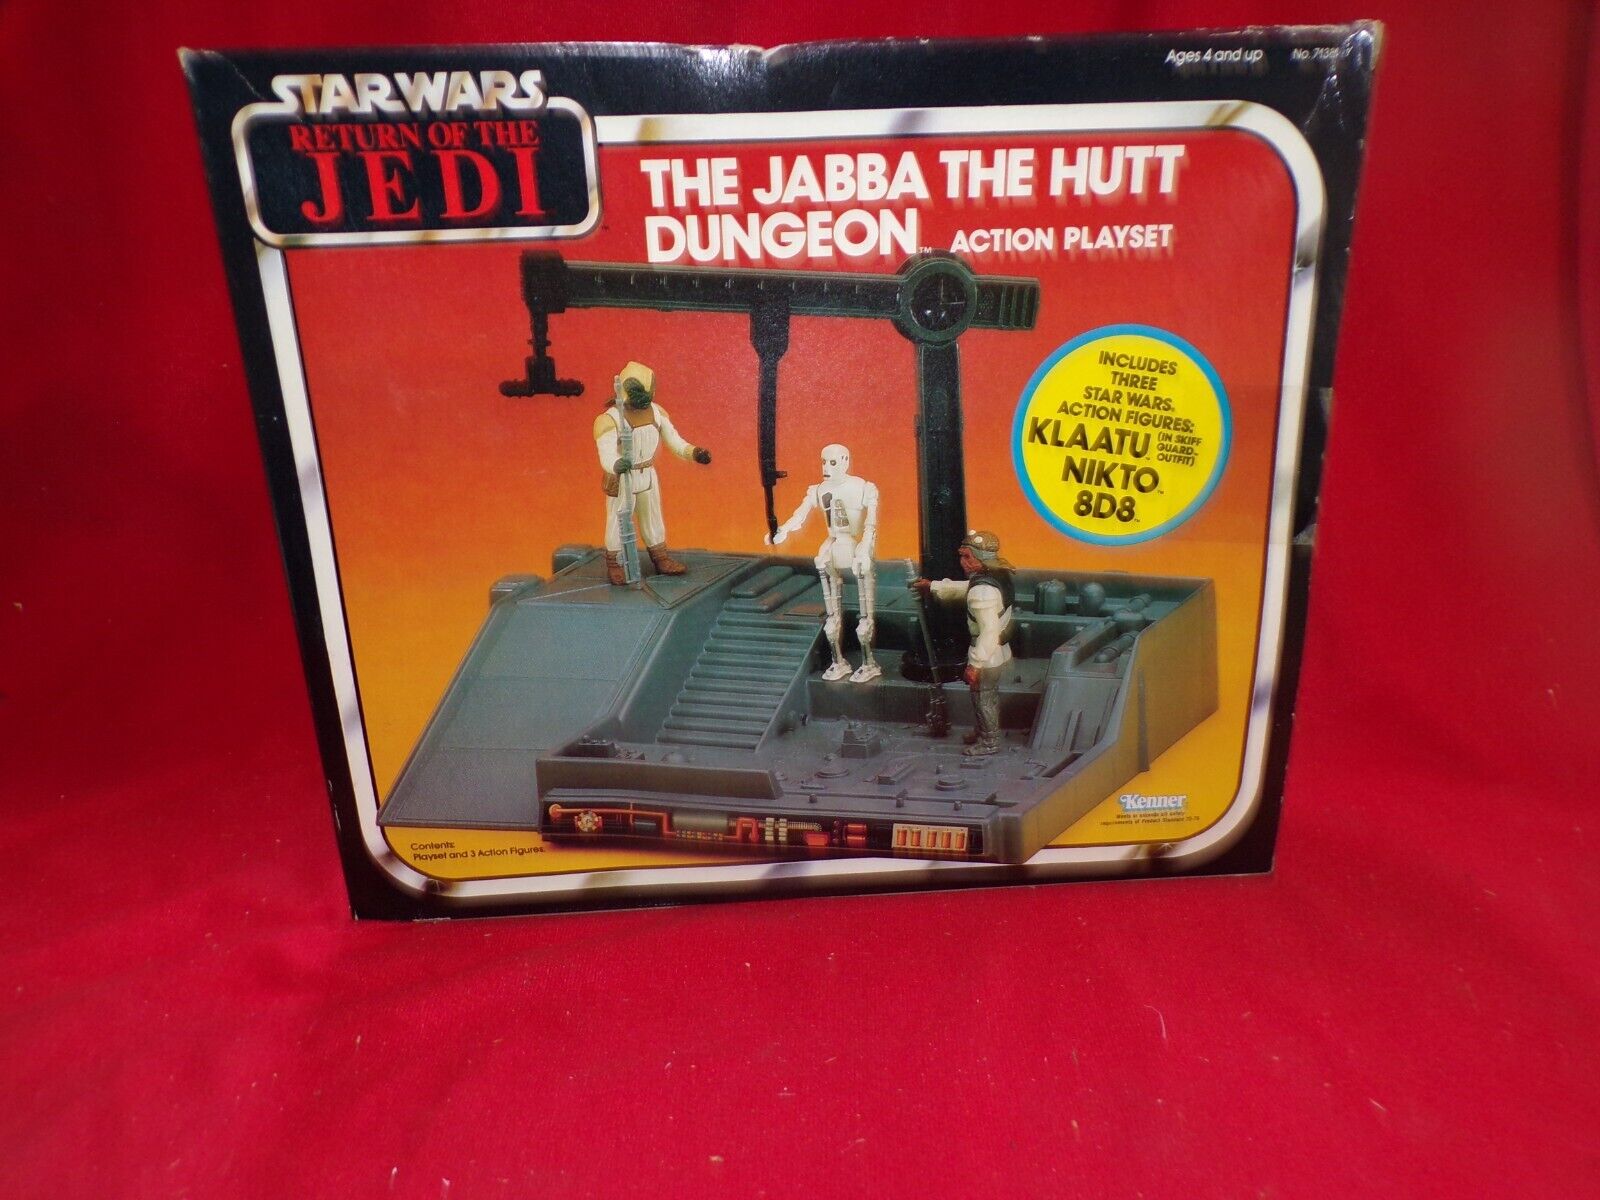 The Jabba the Hutt Dungeon sold